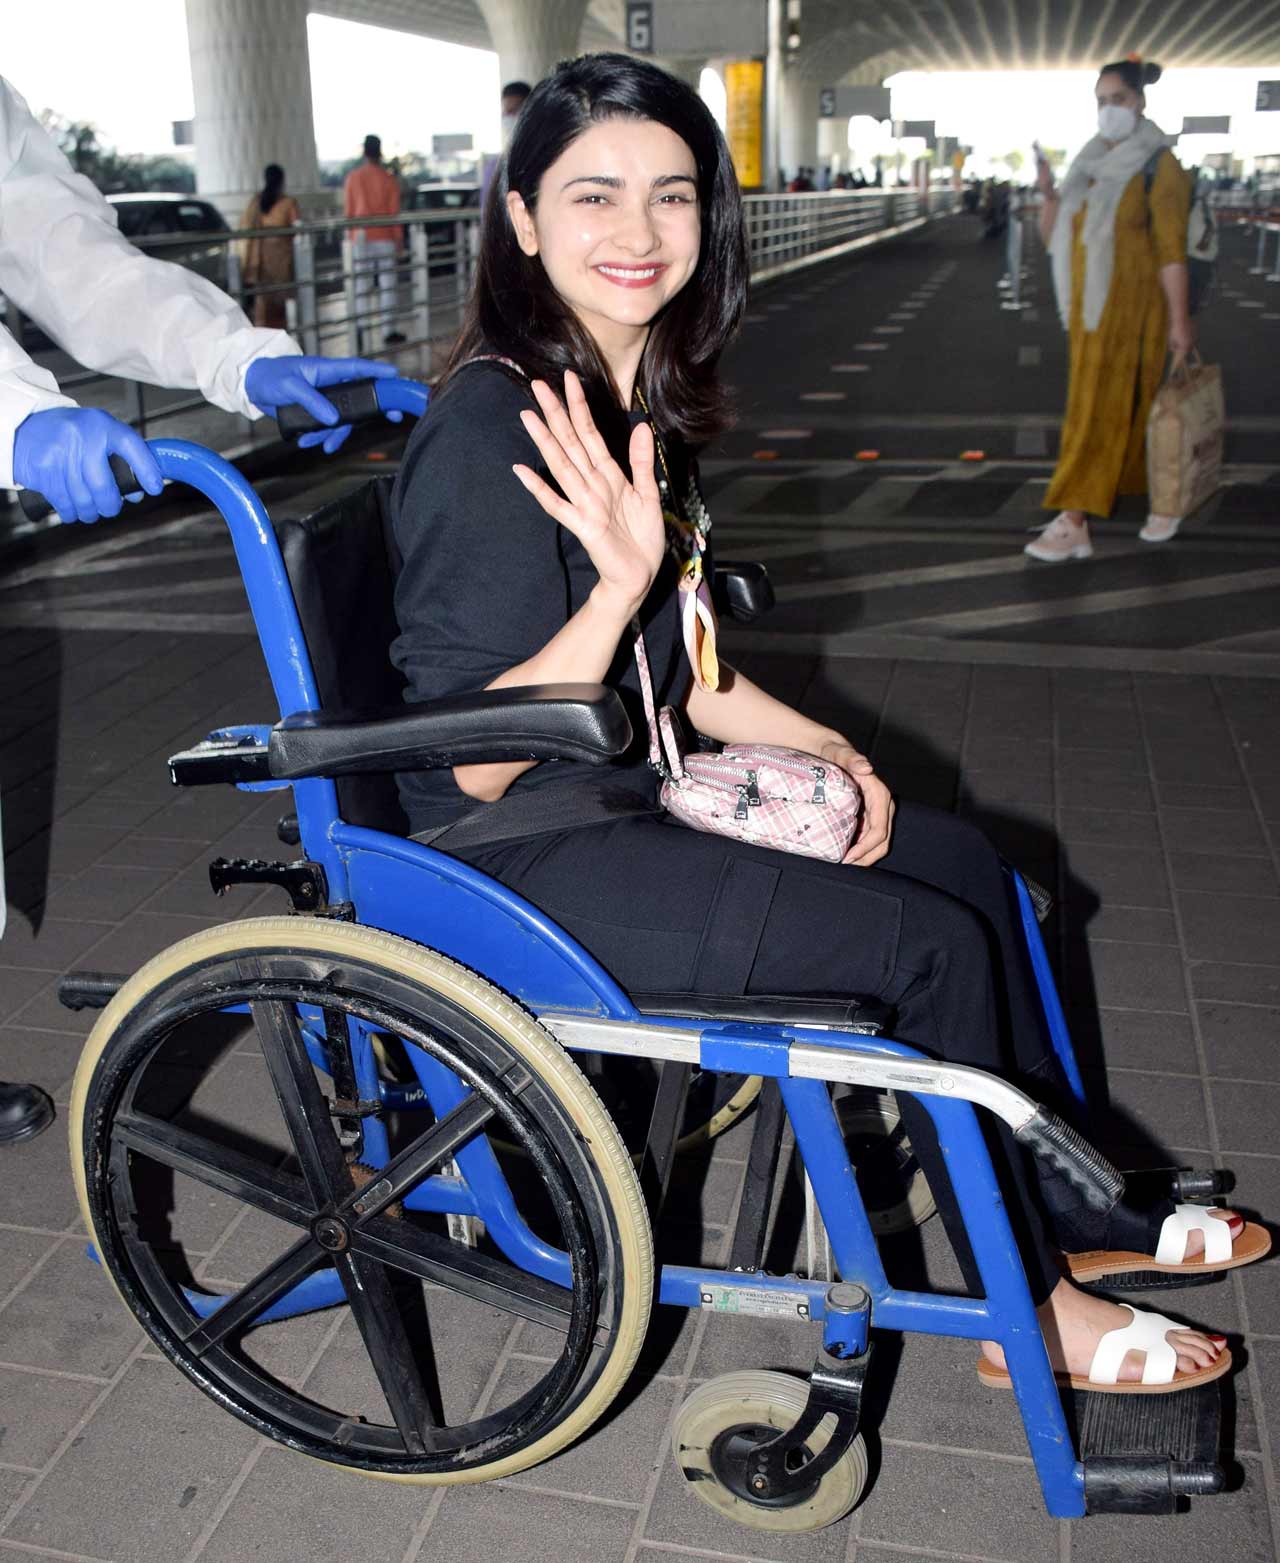 Prachi Desai waved at the paparazzi when snapped at the Mumbai airport. The actress was seen sitting on a wheelchair, as she broke her feet a while ago.